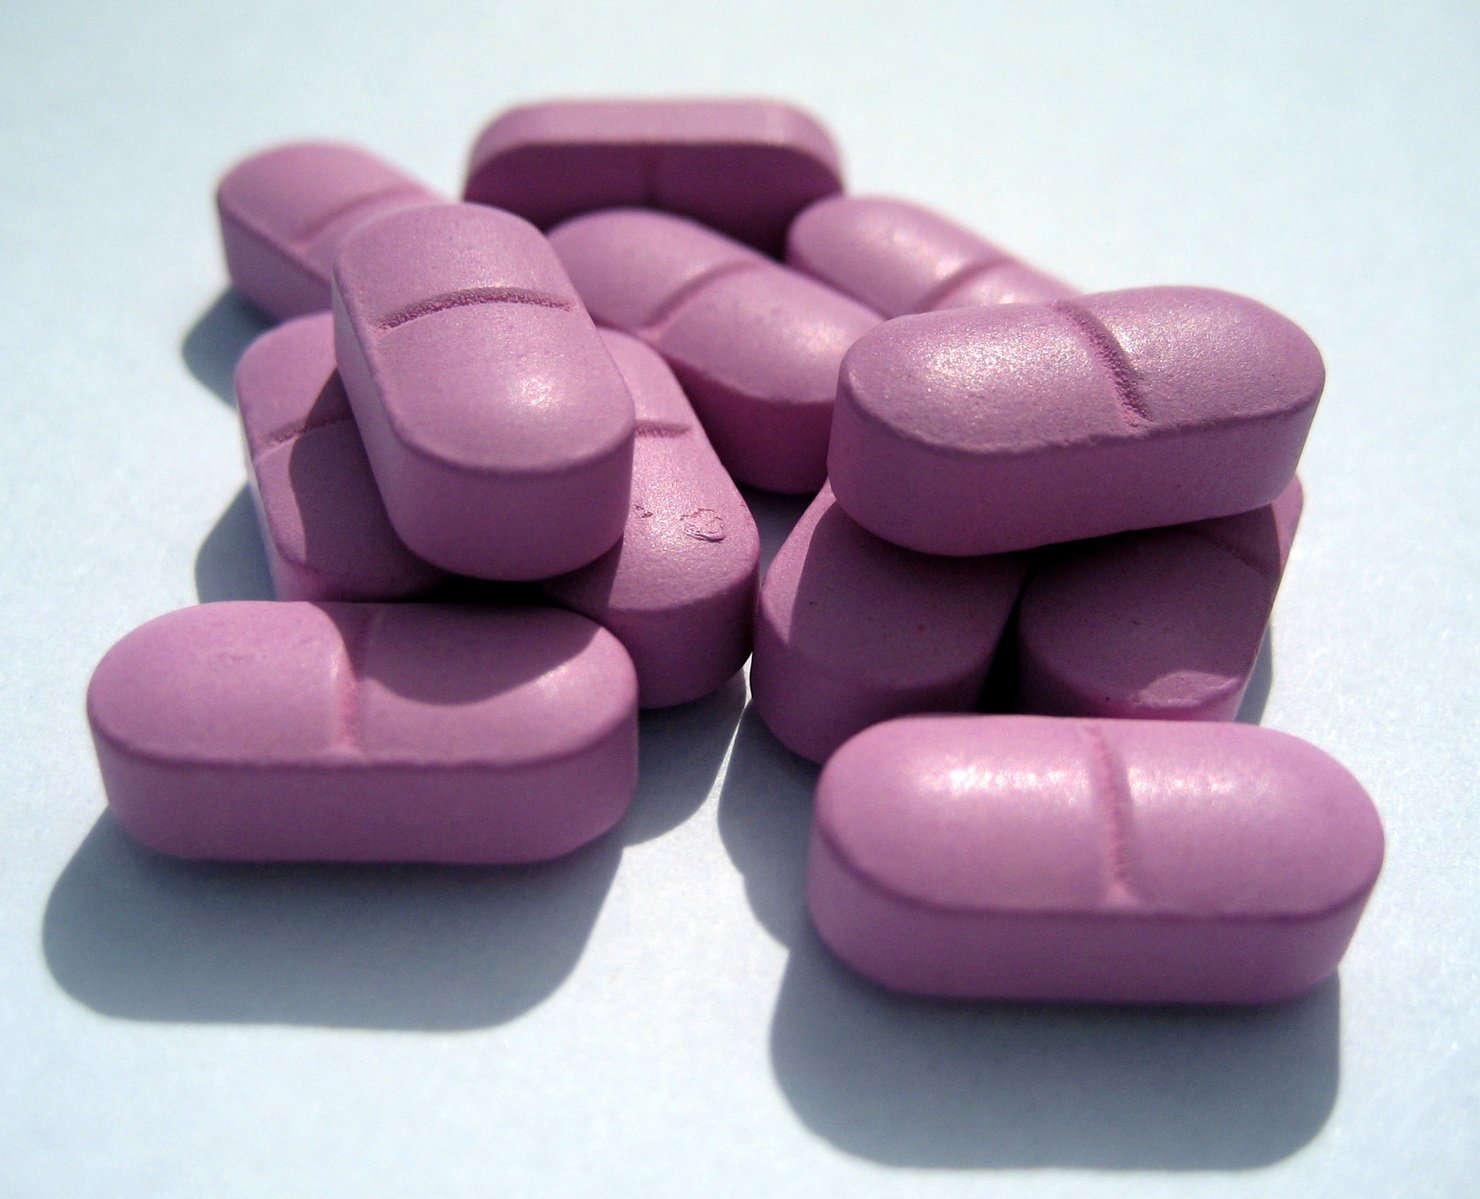 pink pills are piled up on a table